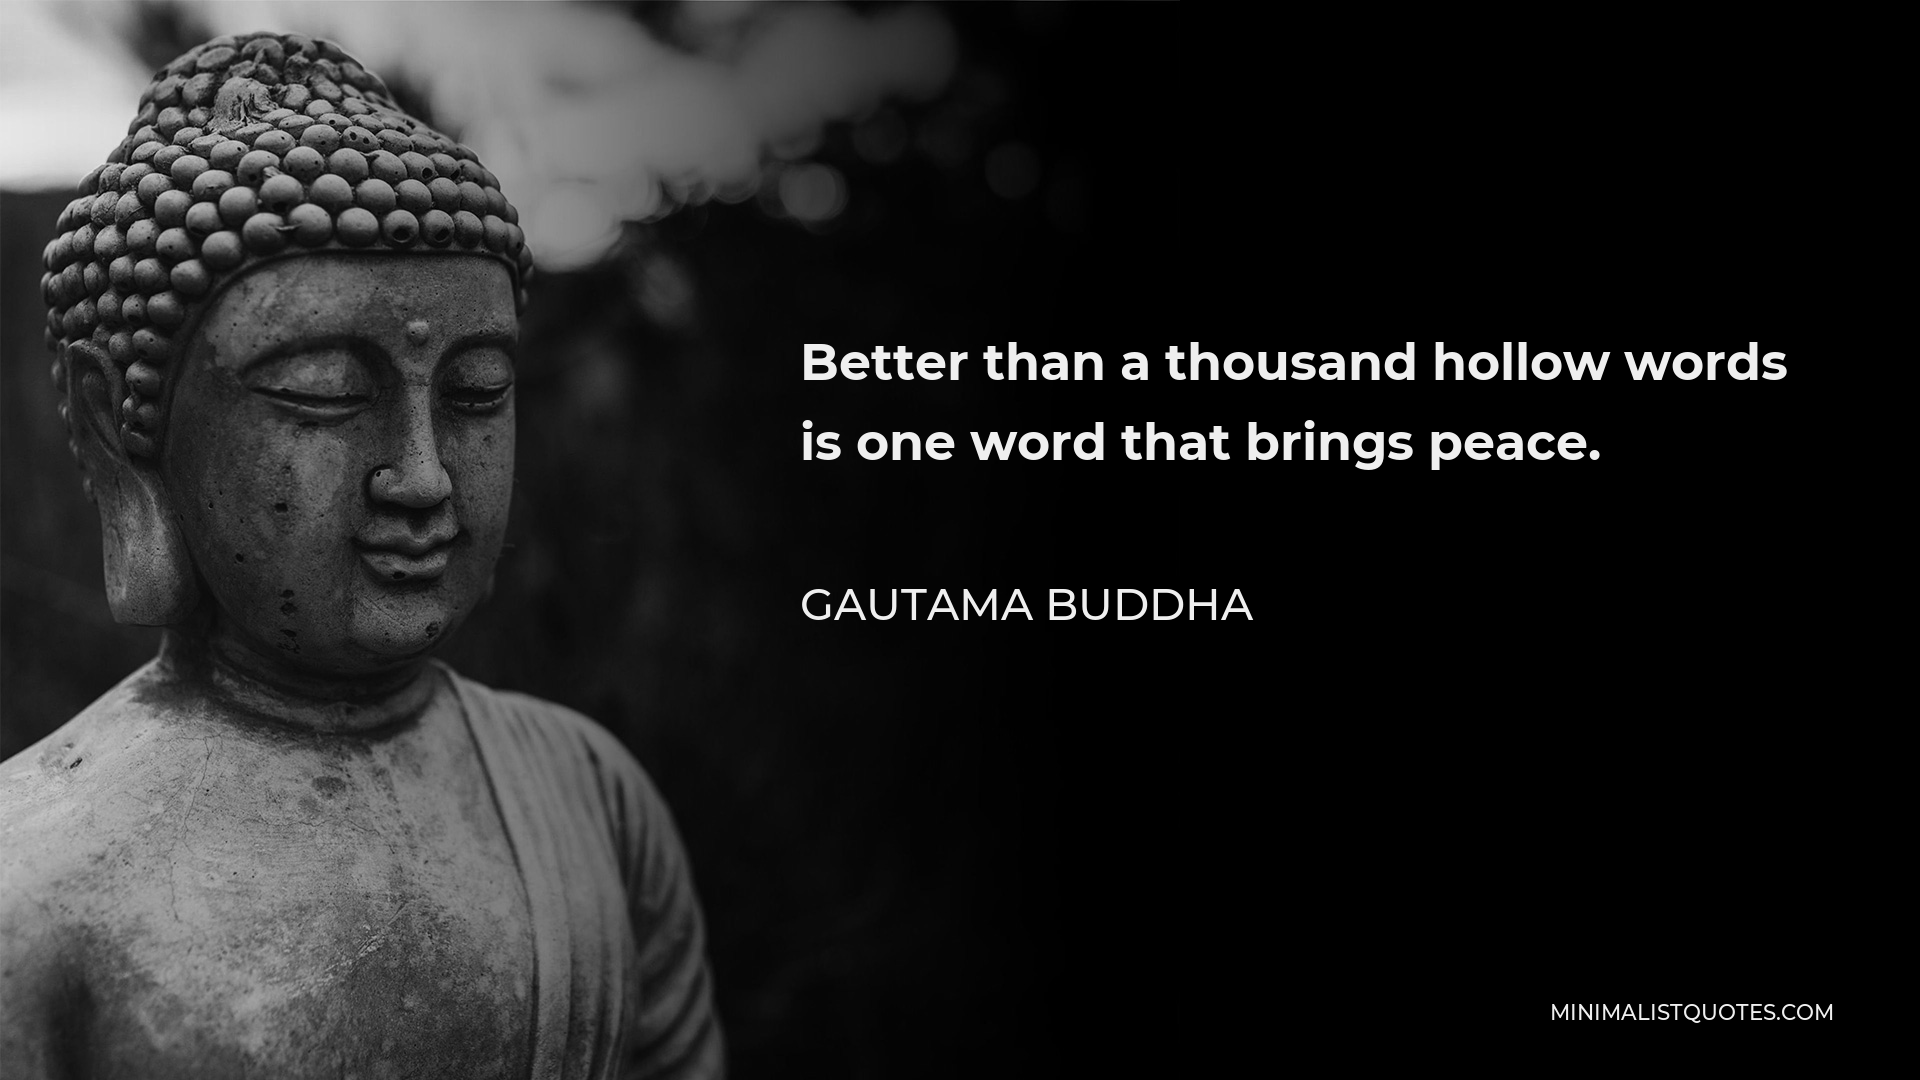 Gautama Buddha Quote - Better than a thousand hollow words is one word that brings peace.